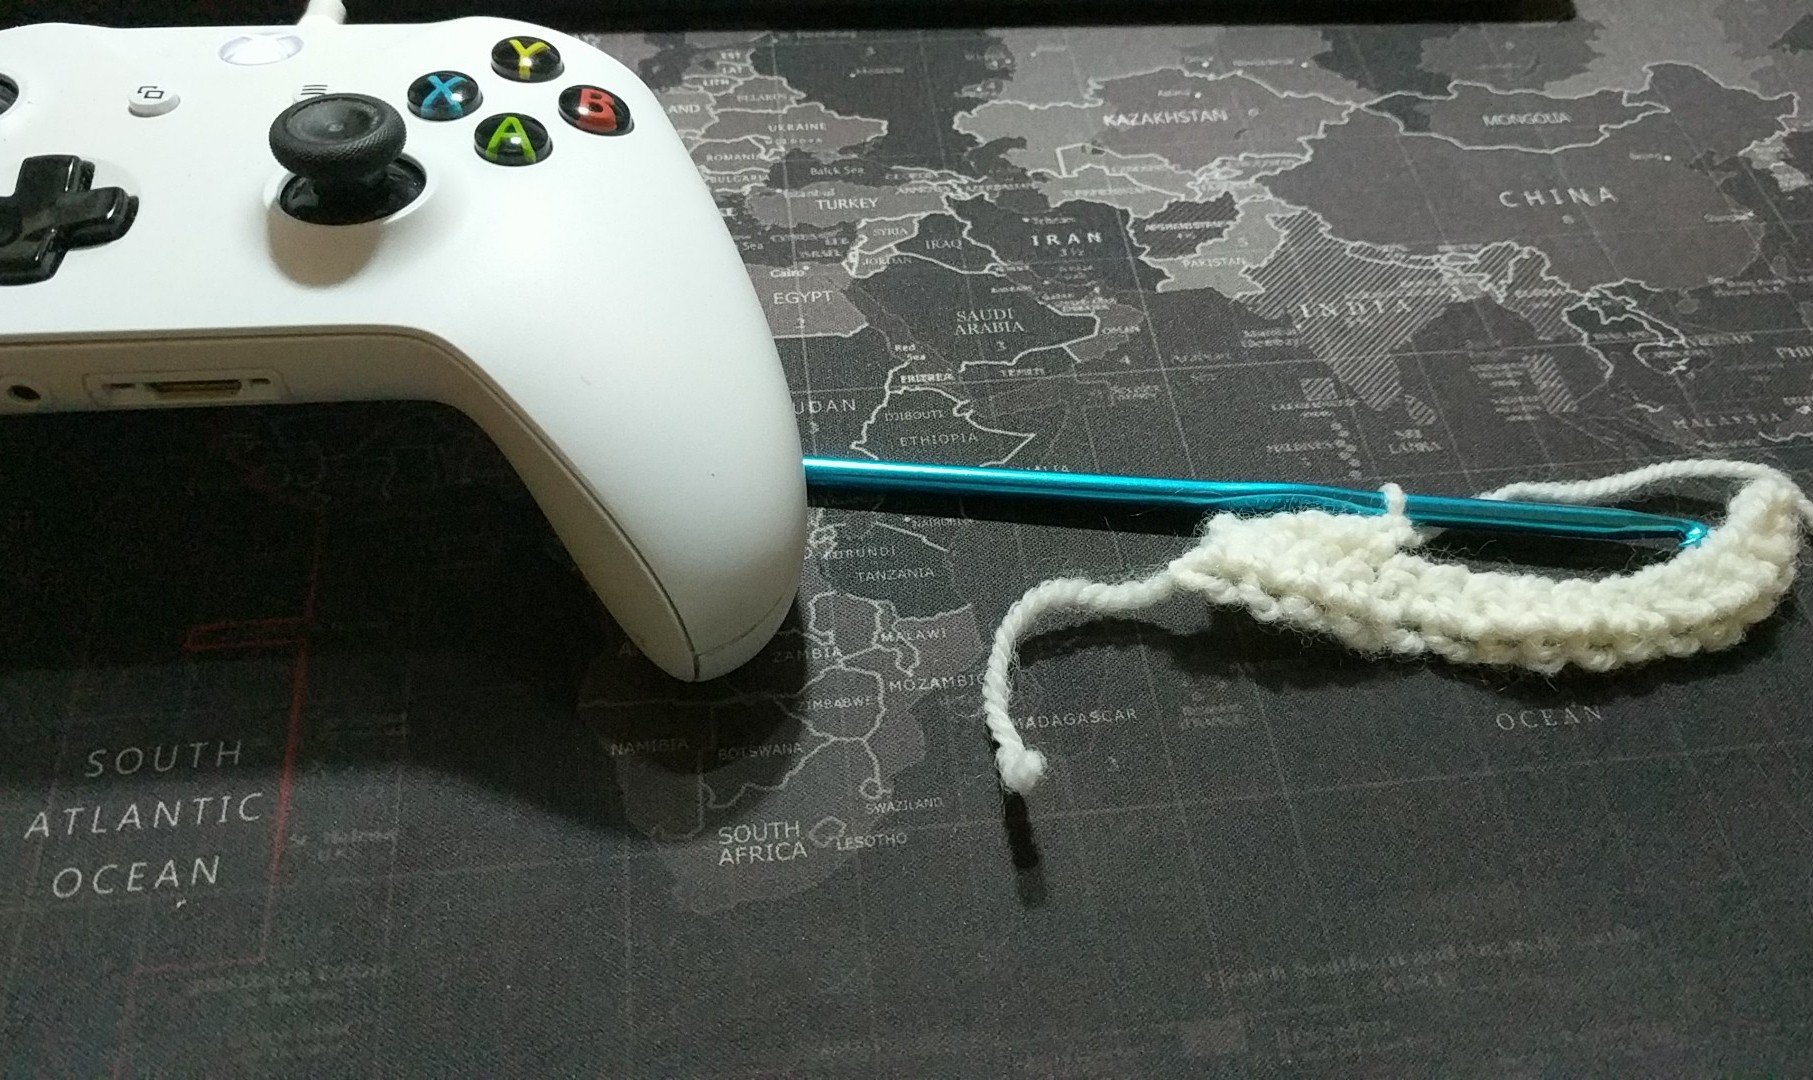 Crochet and Gaming